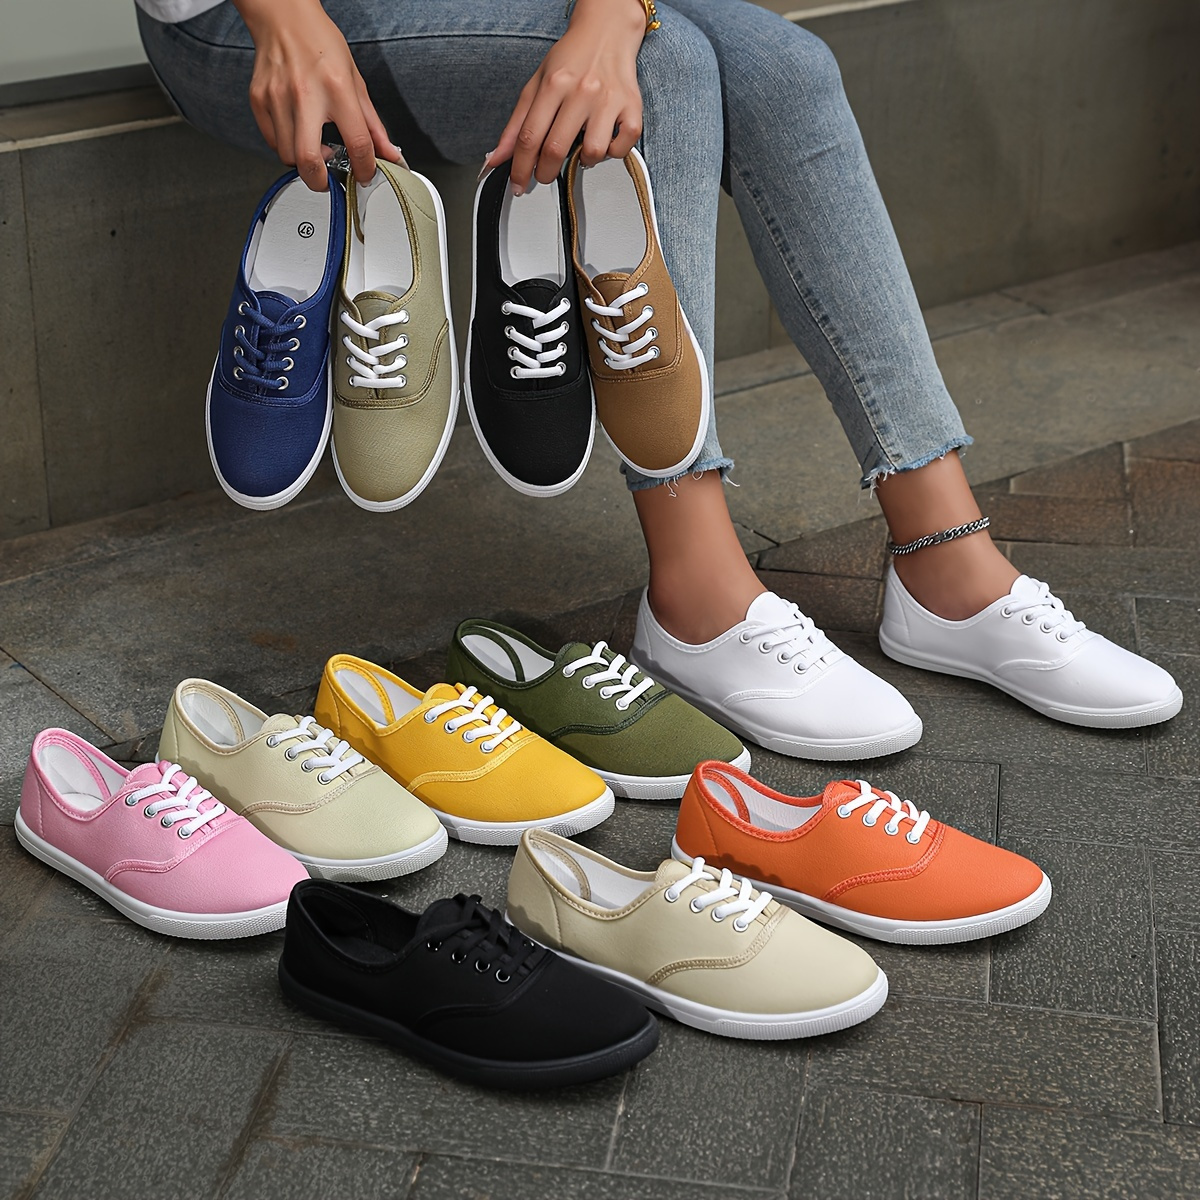 

Women's Solid Color Minimalist Shoes, Lace Up Lightweight Soft Sole Casual Shoes, Low-top Walking Canvas Shoes